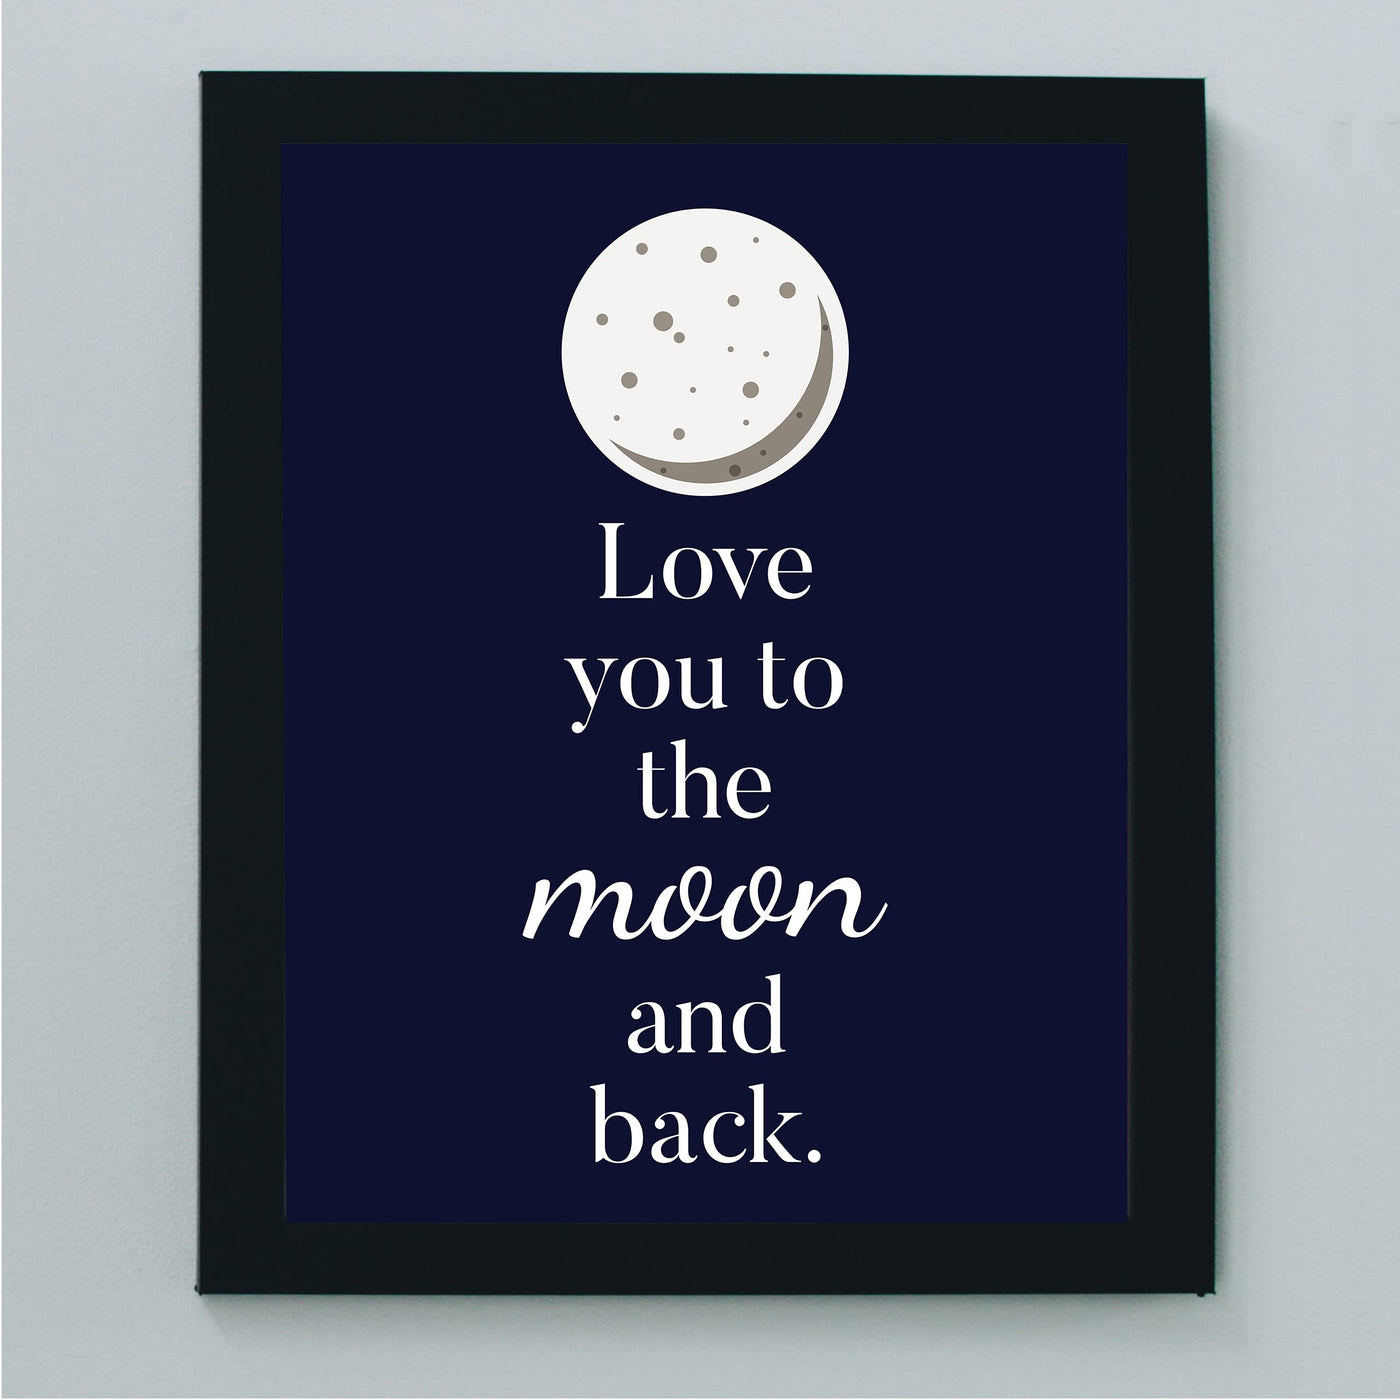 Love You to the Moon and Back-Inspirational Family Quotes Wall Art -8 x 10" Starry Night Typography Print w/Full Moon -Ready to Frame. Home-Childrens Bedroom-Nursery-Play Room Decor. Great Gift!